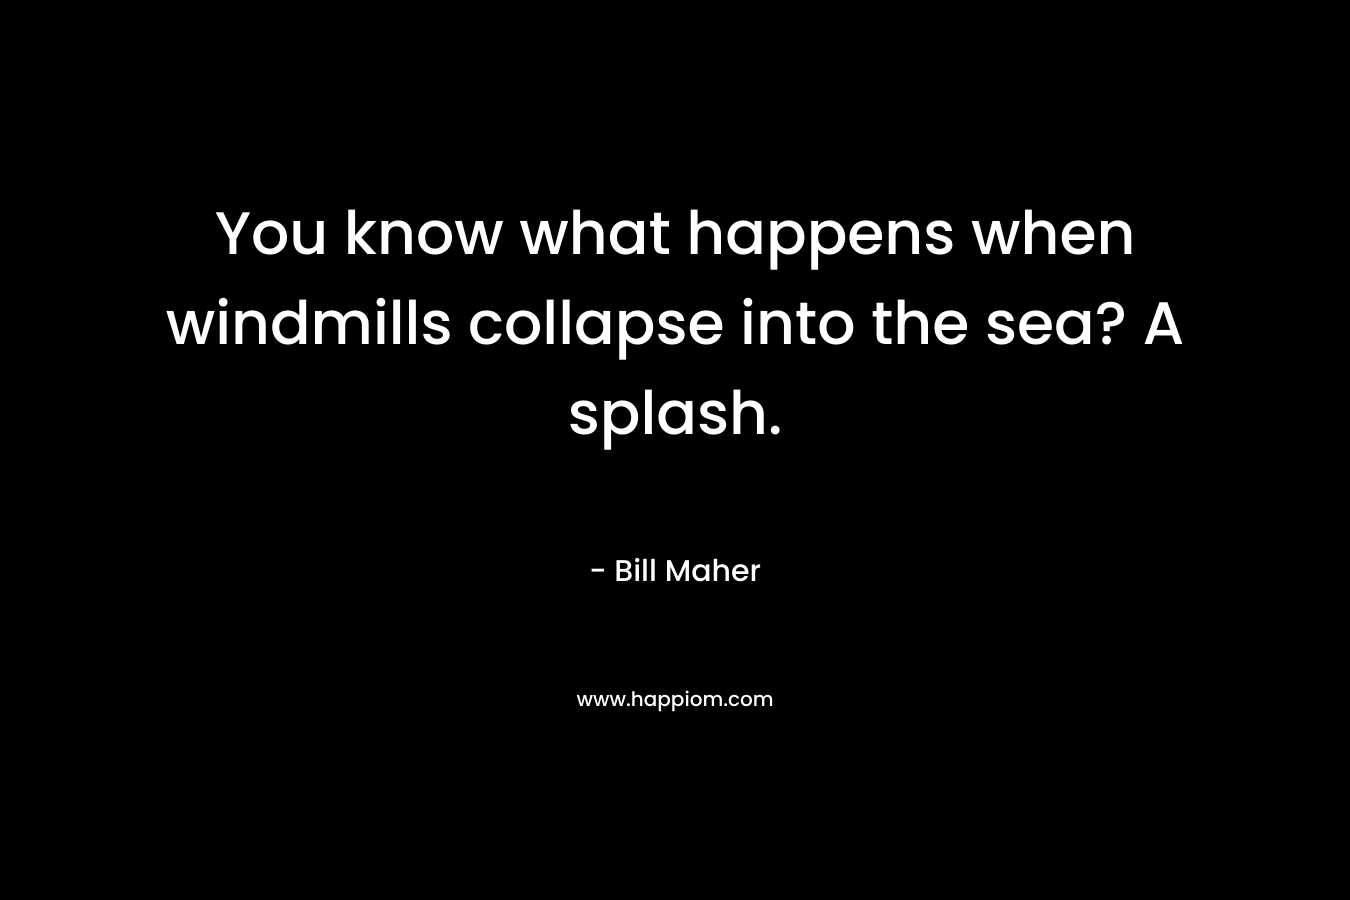 You know what happens when windmills collapse into the sea? A splash. – Bill Maher